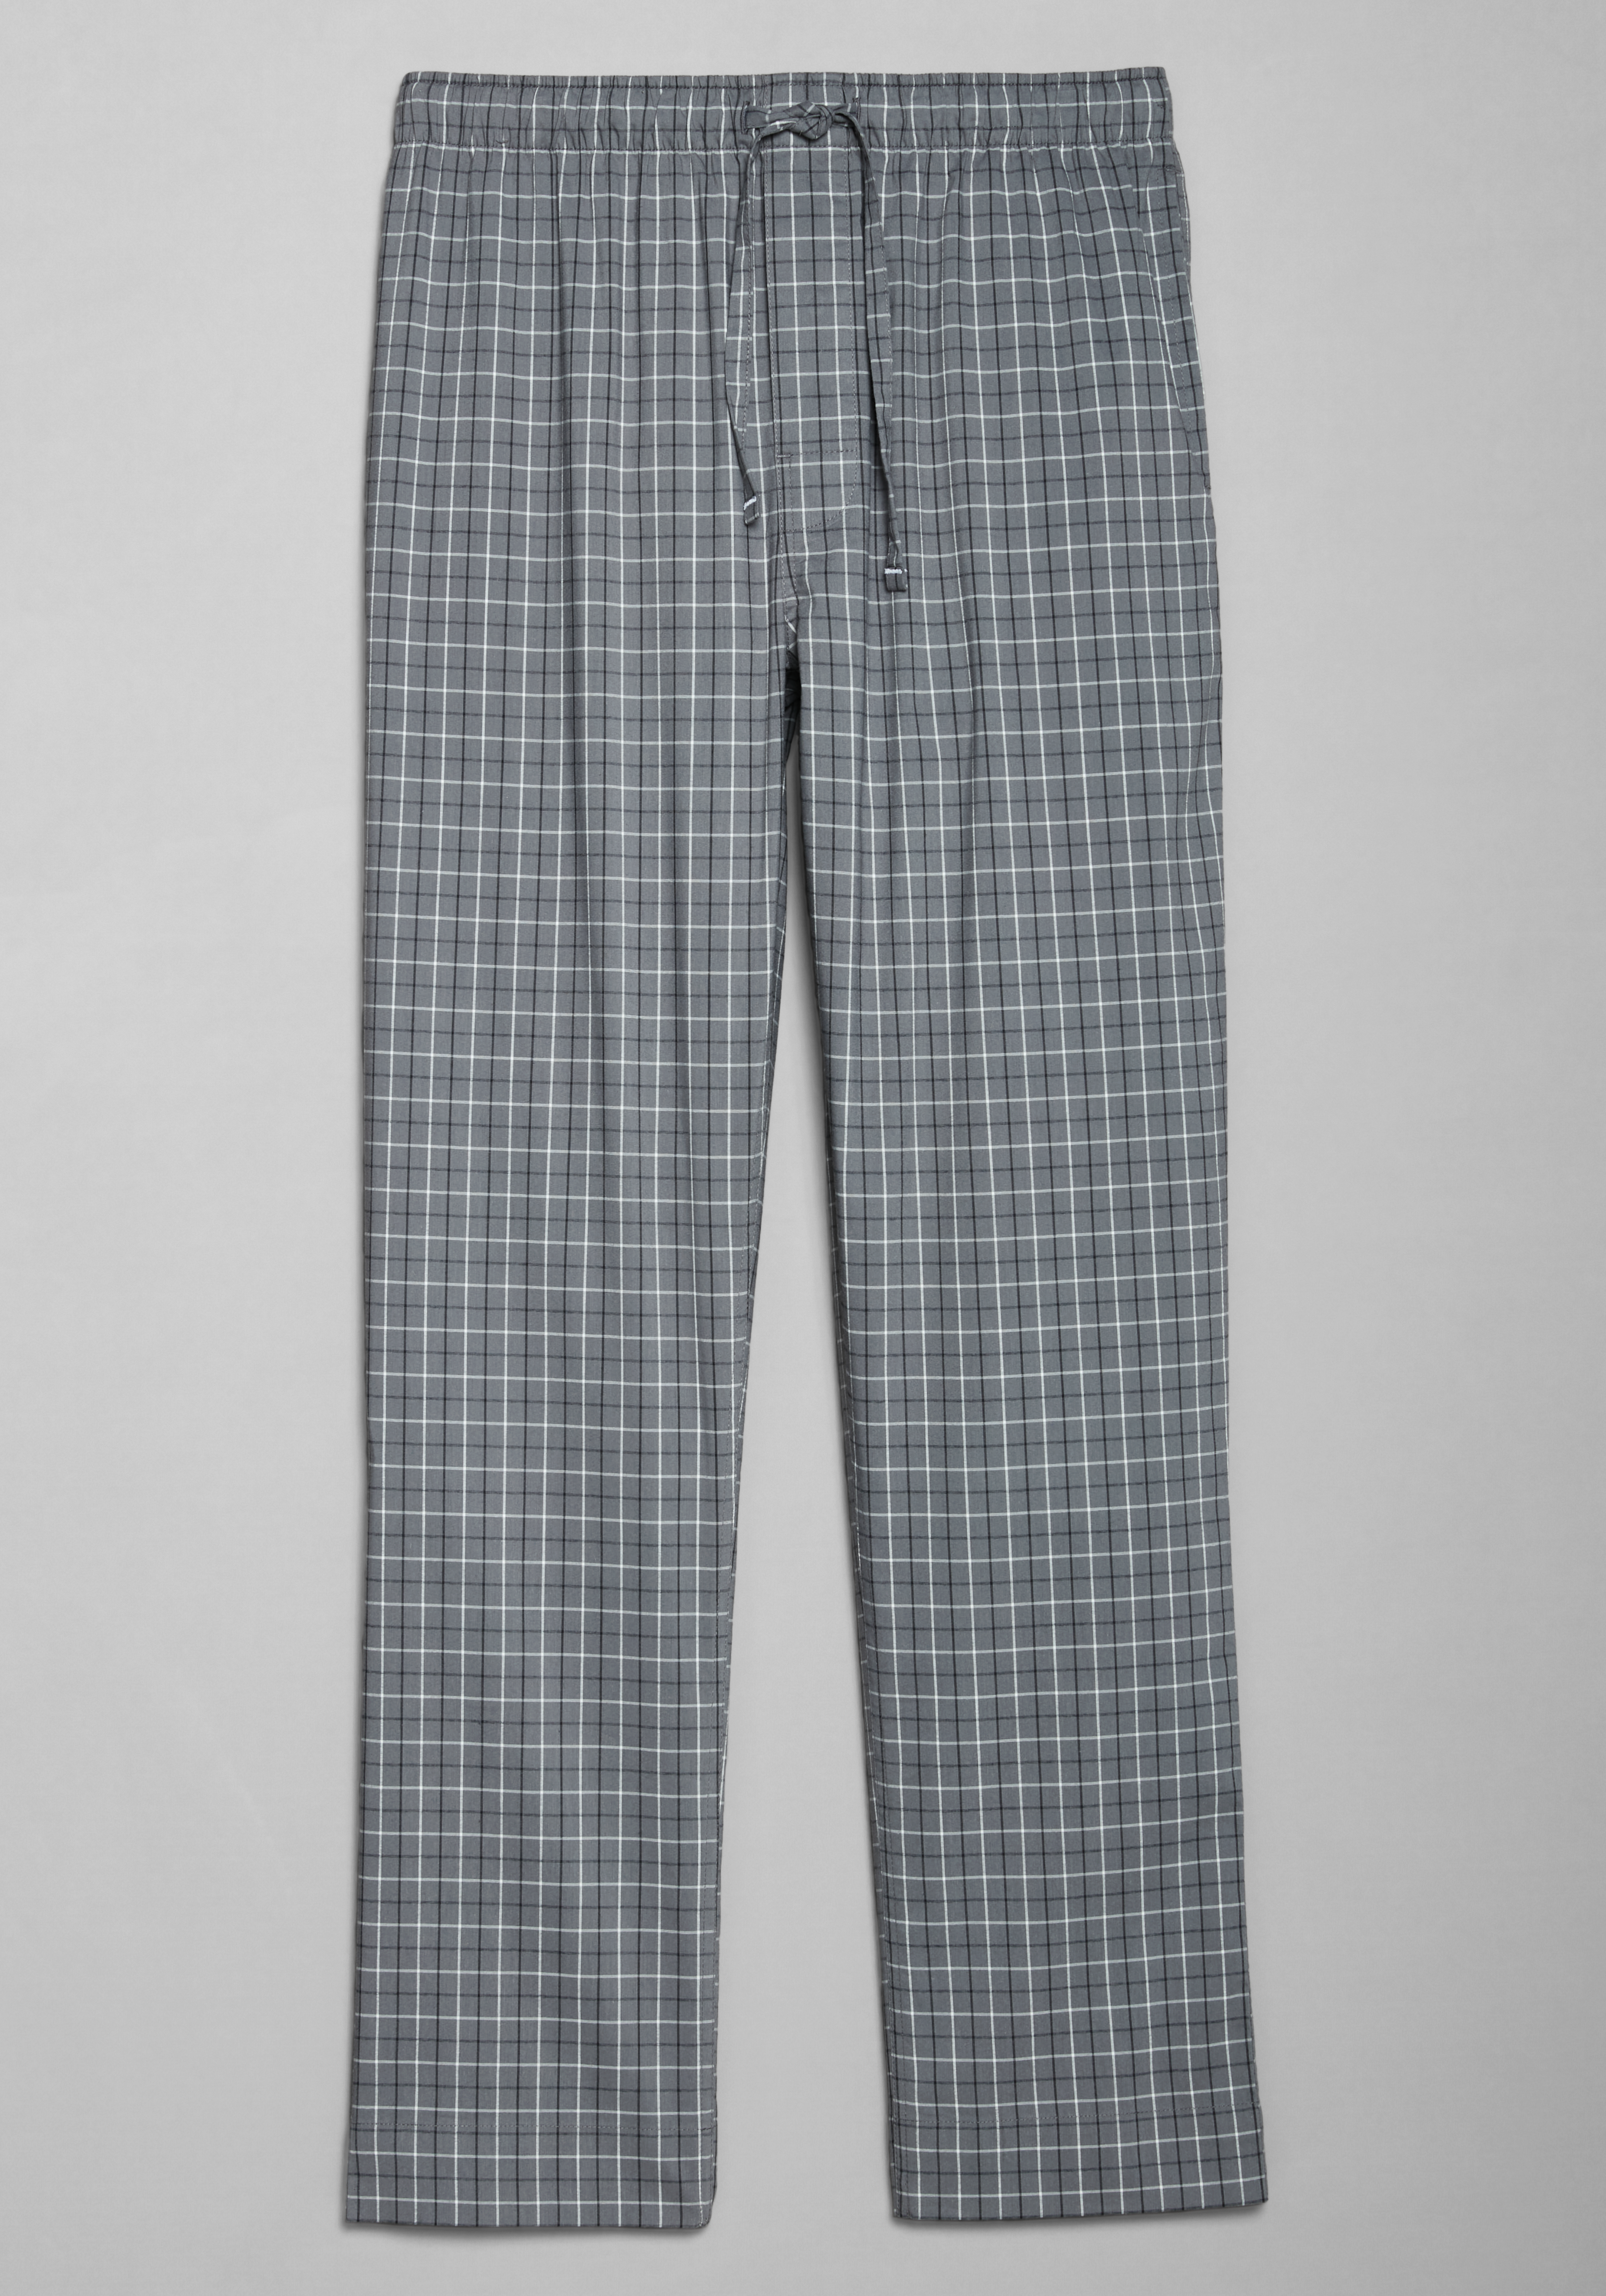 MSX by Michael Strahan Pajama Pant CLEARANCE - All Clearance | Jos A Bank